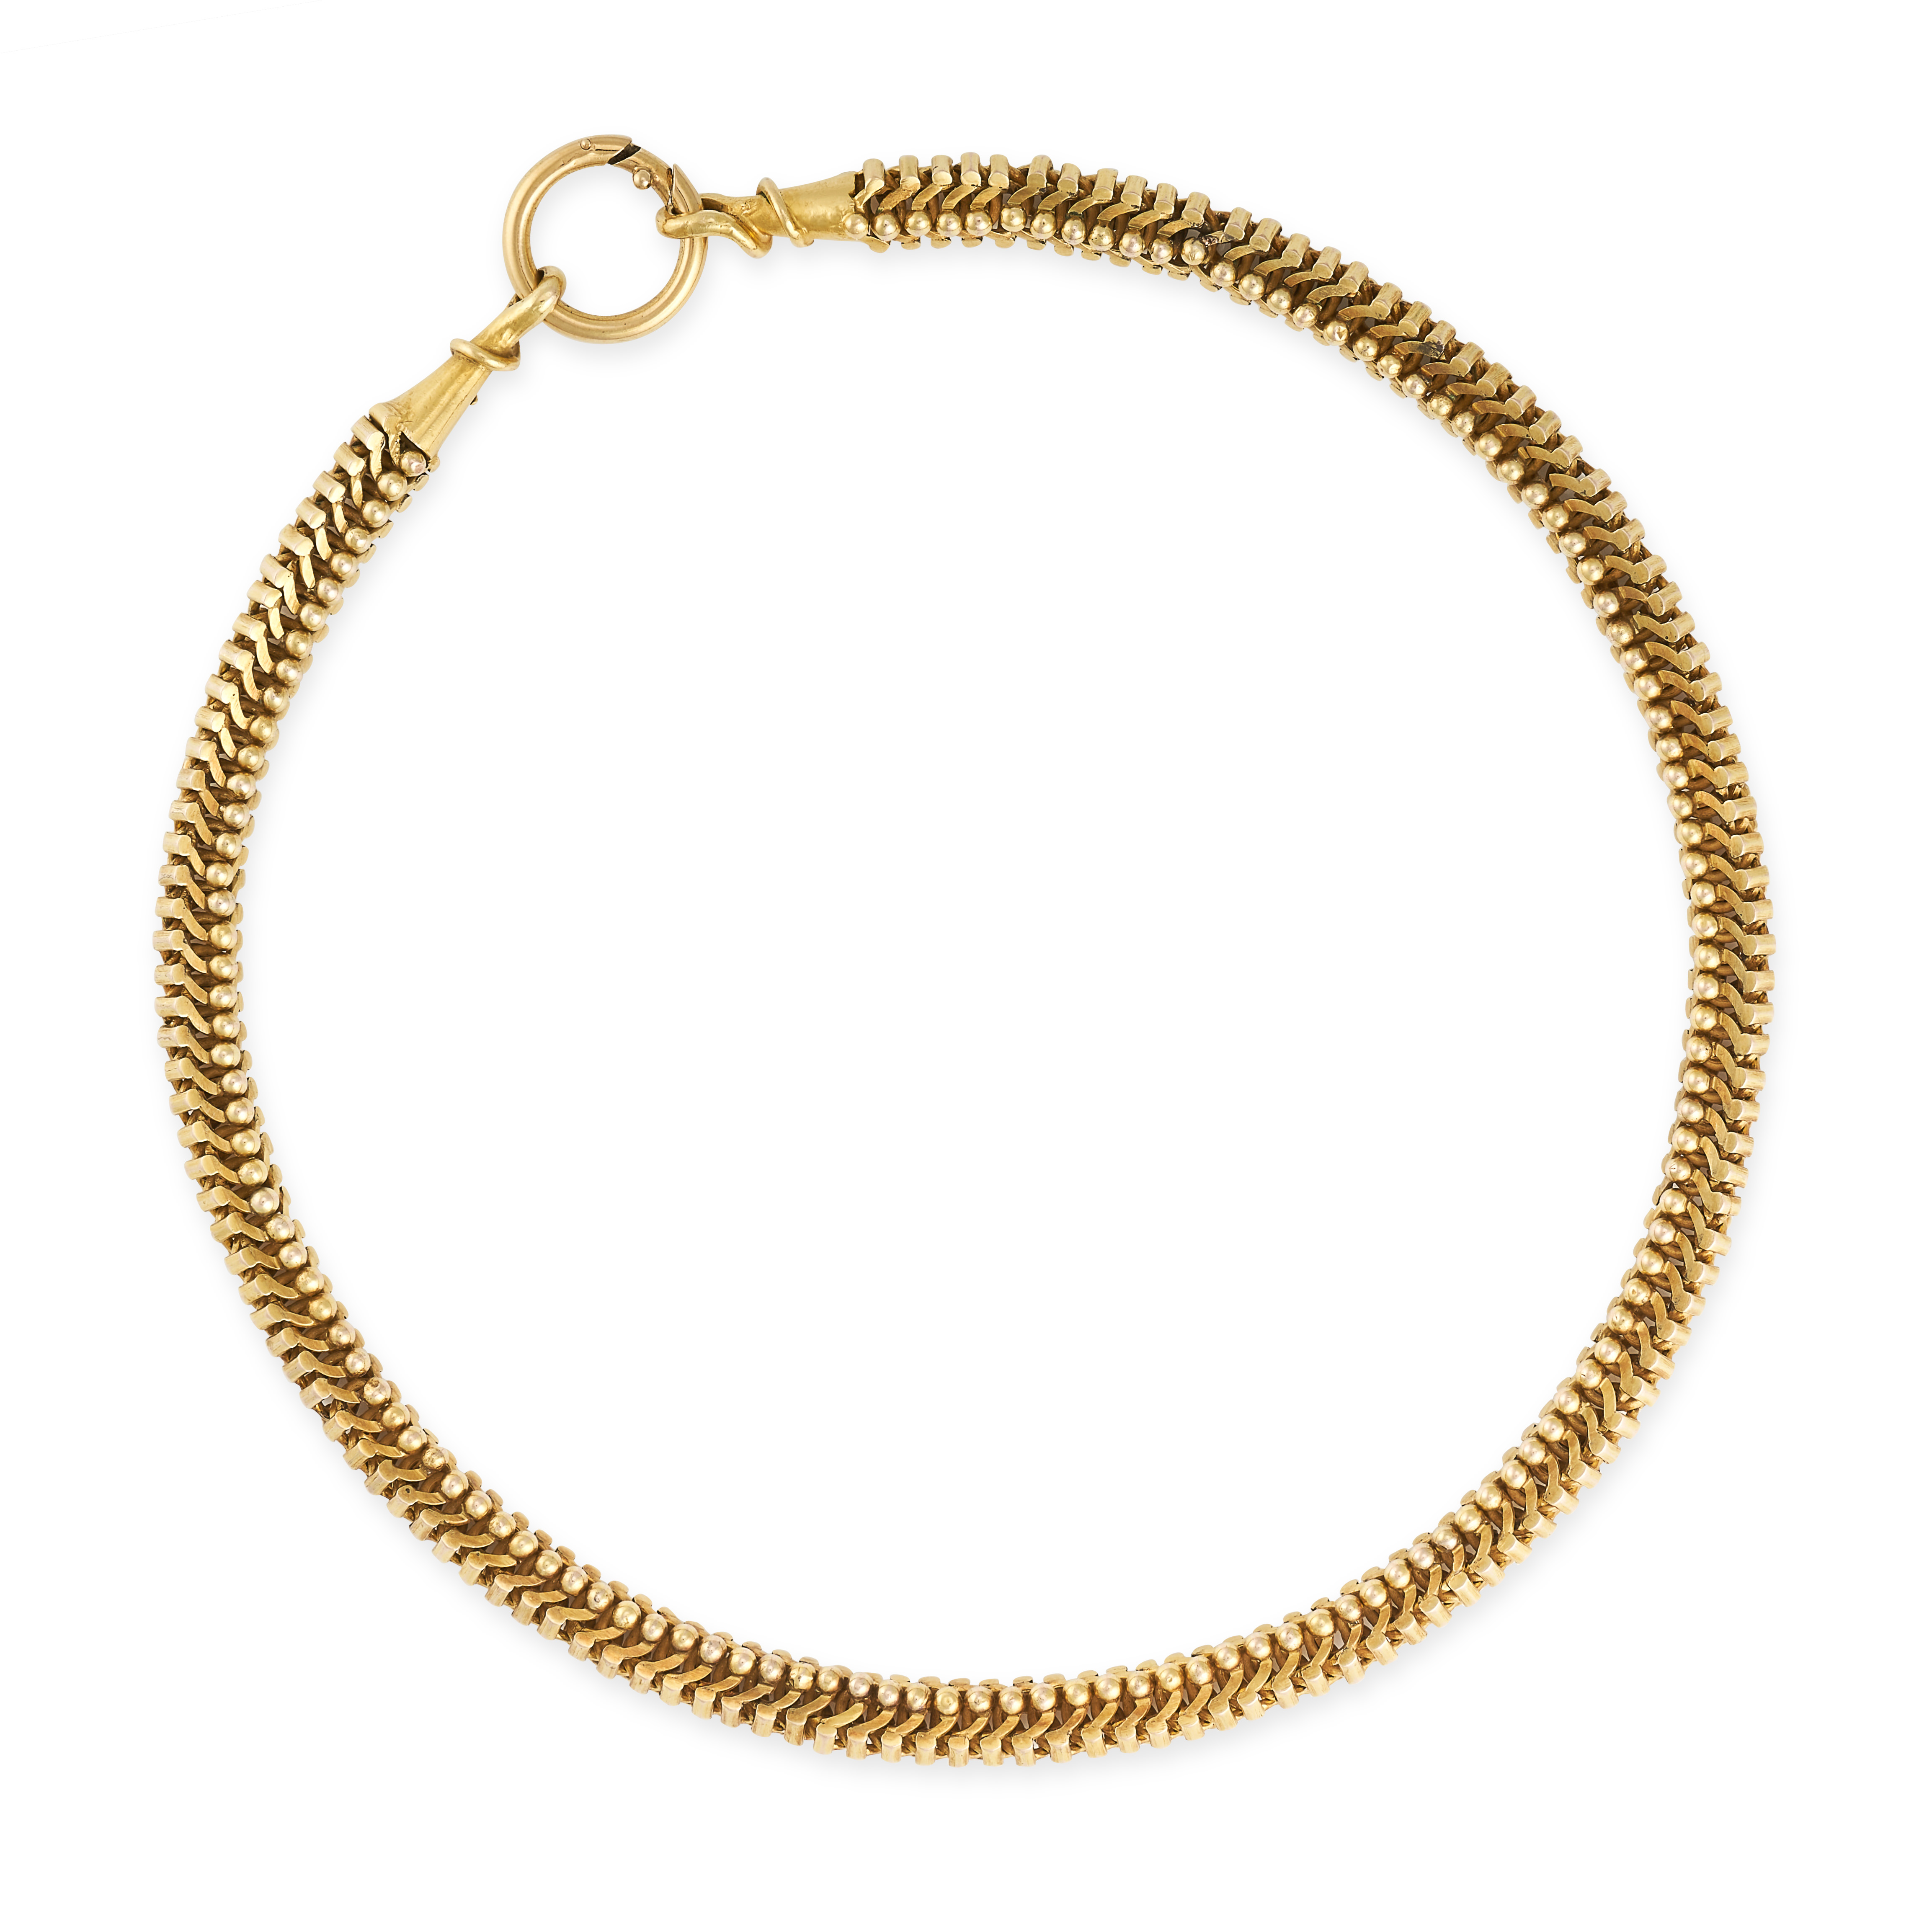 A VICTORIAN FANCY LINK GOLD GUARD CHAIN NECKLACE, LATE 19TH CENTURY  No assay marks  Length 415mm